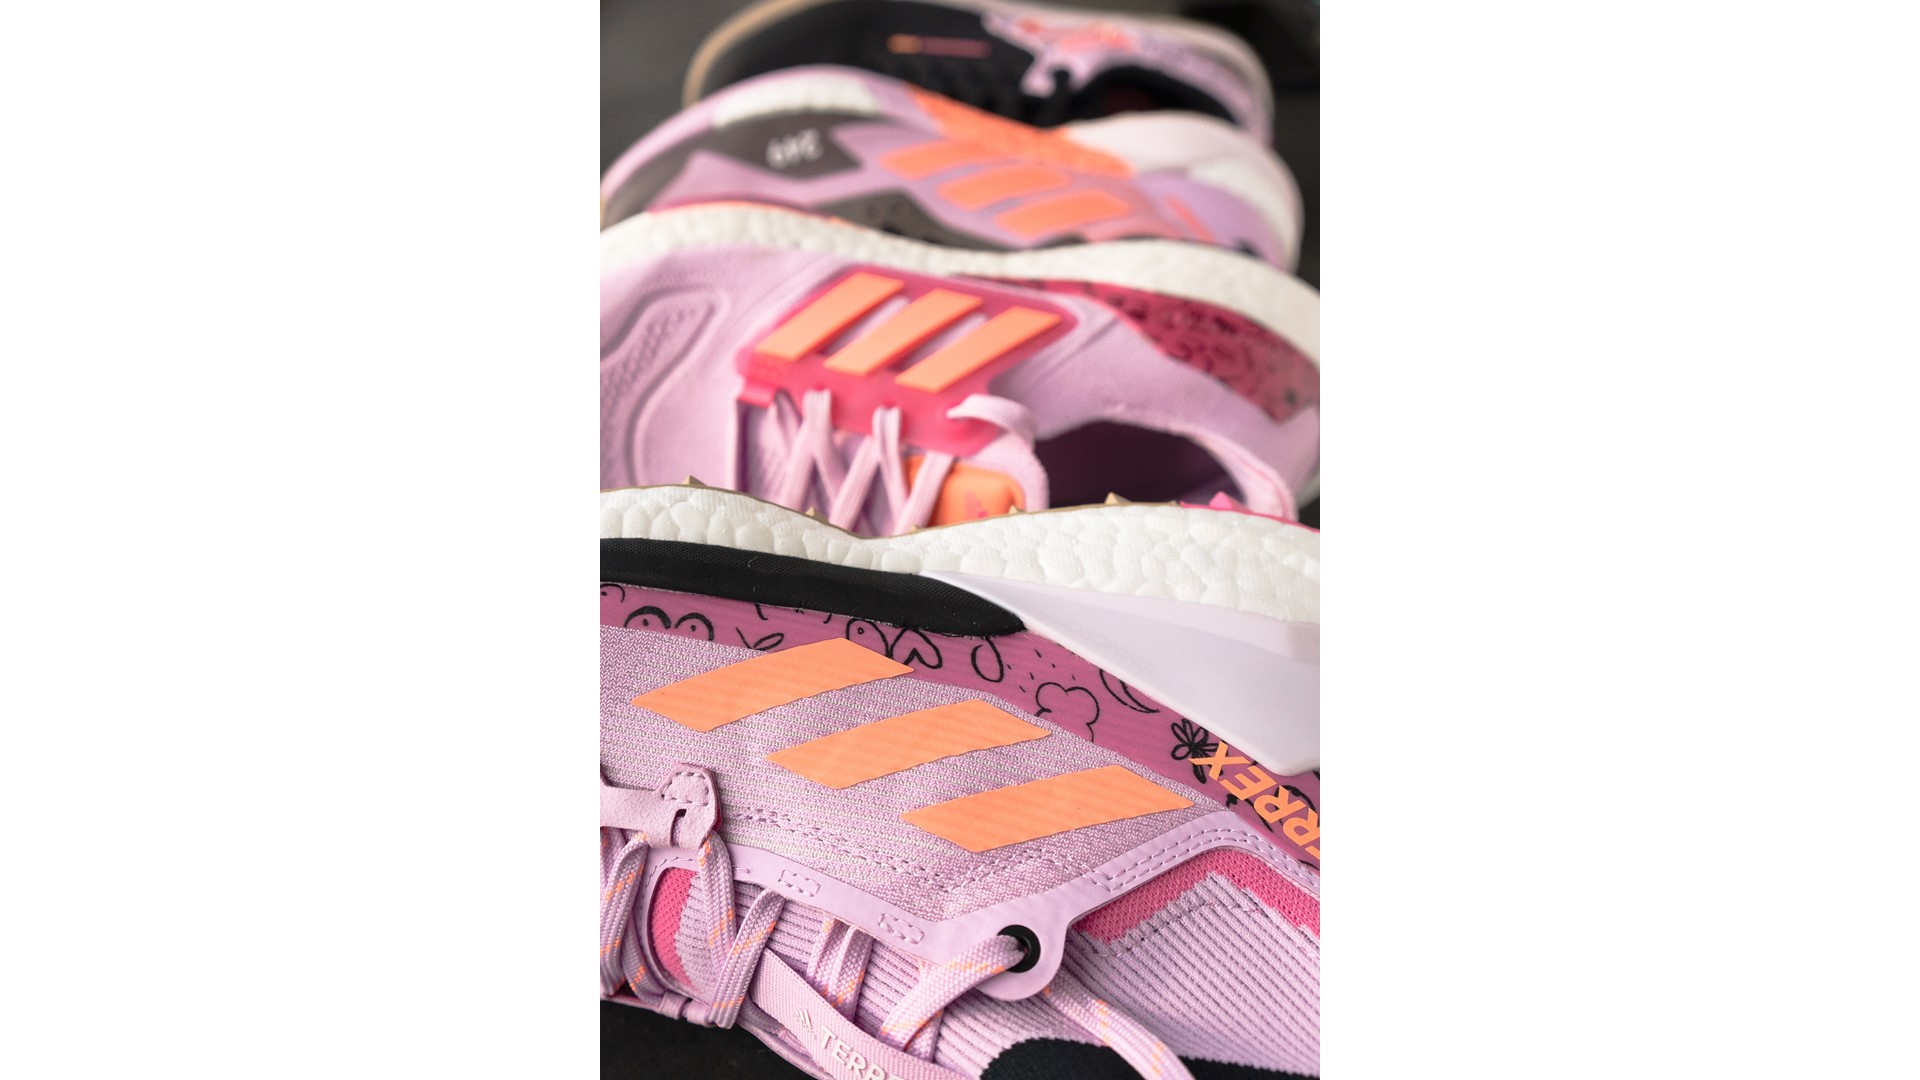 Introducing the Adidas Breast Cancer Awareness Collection – A